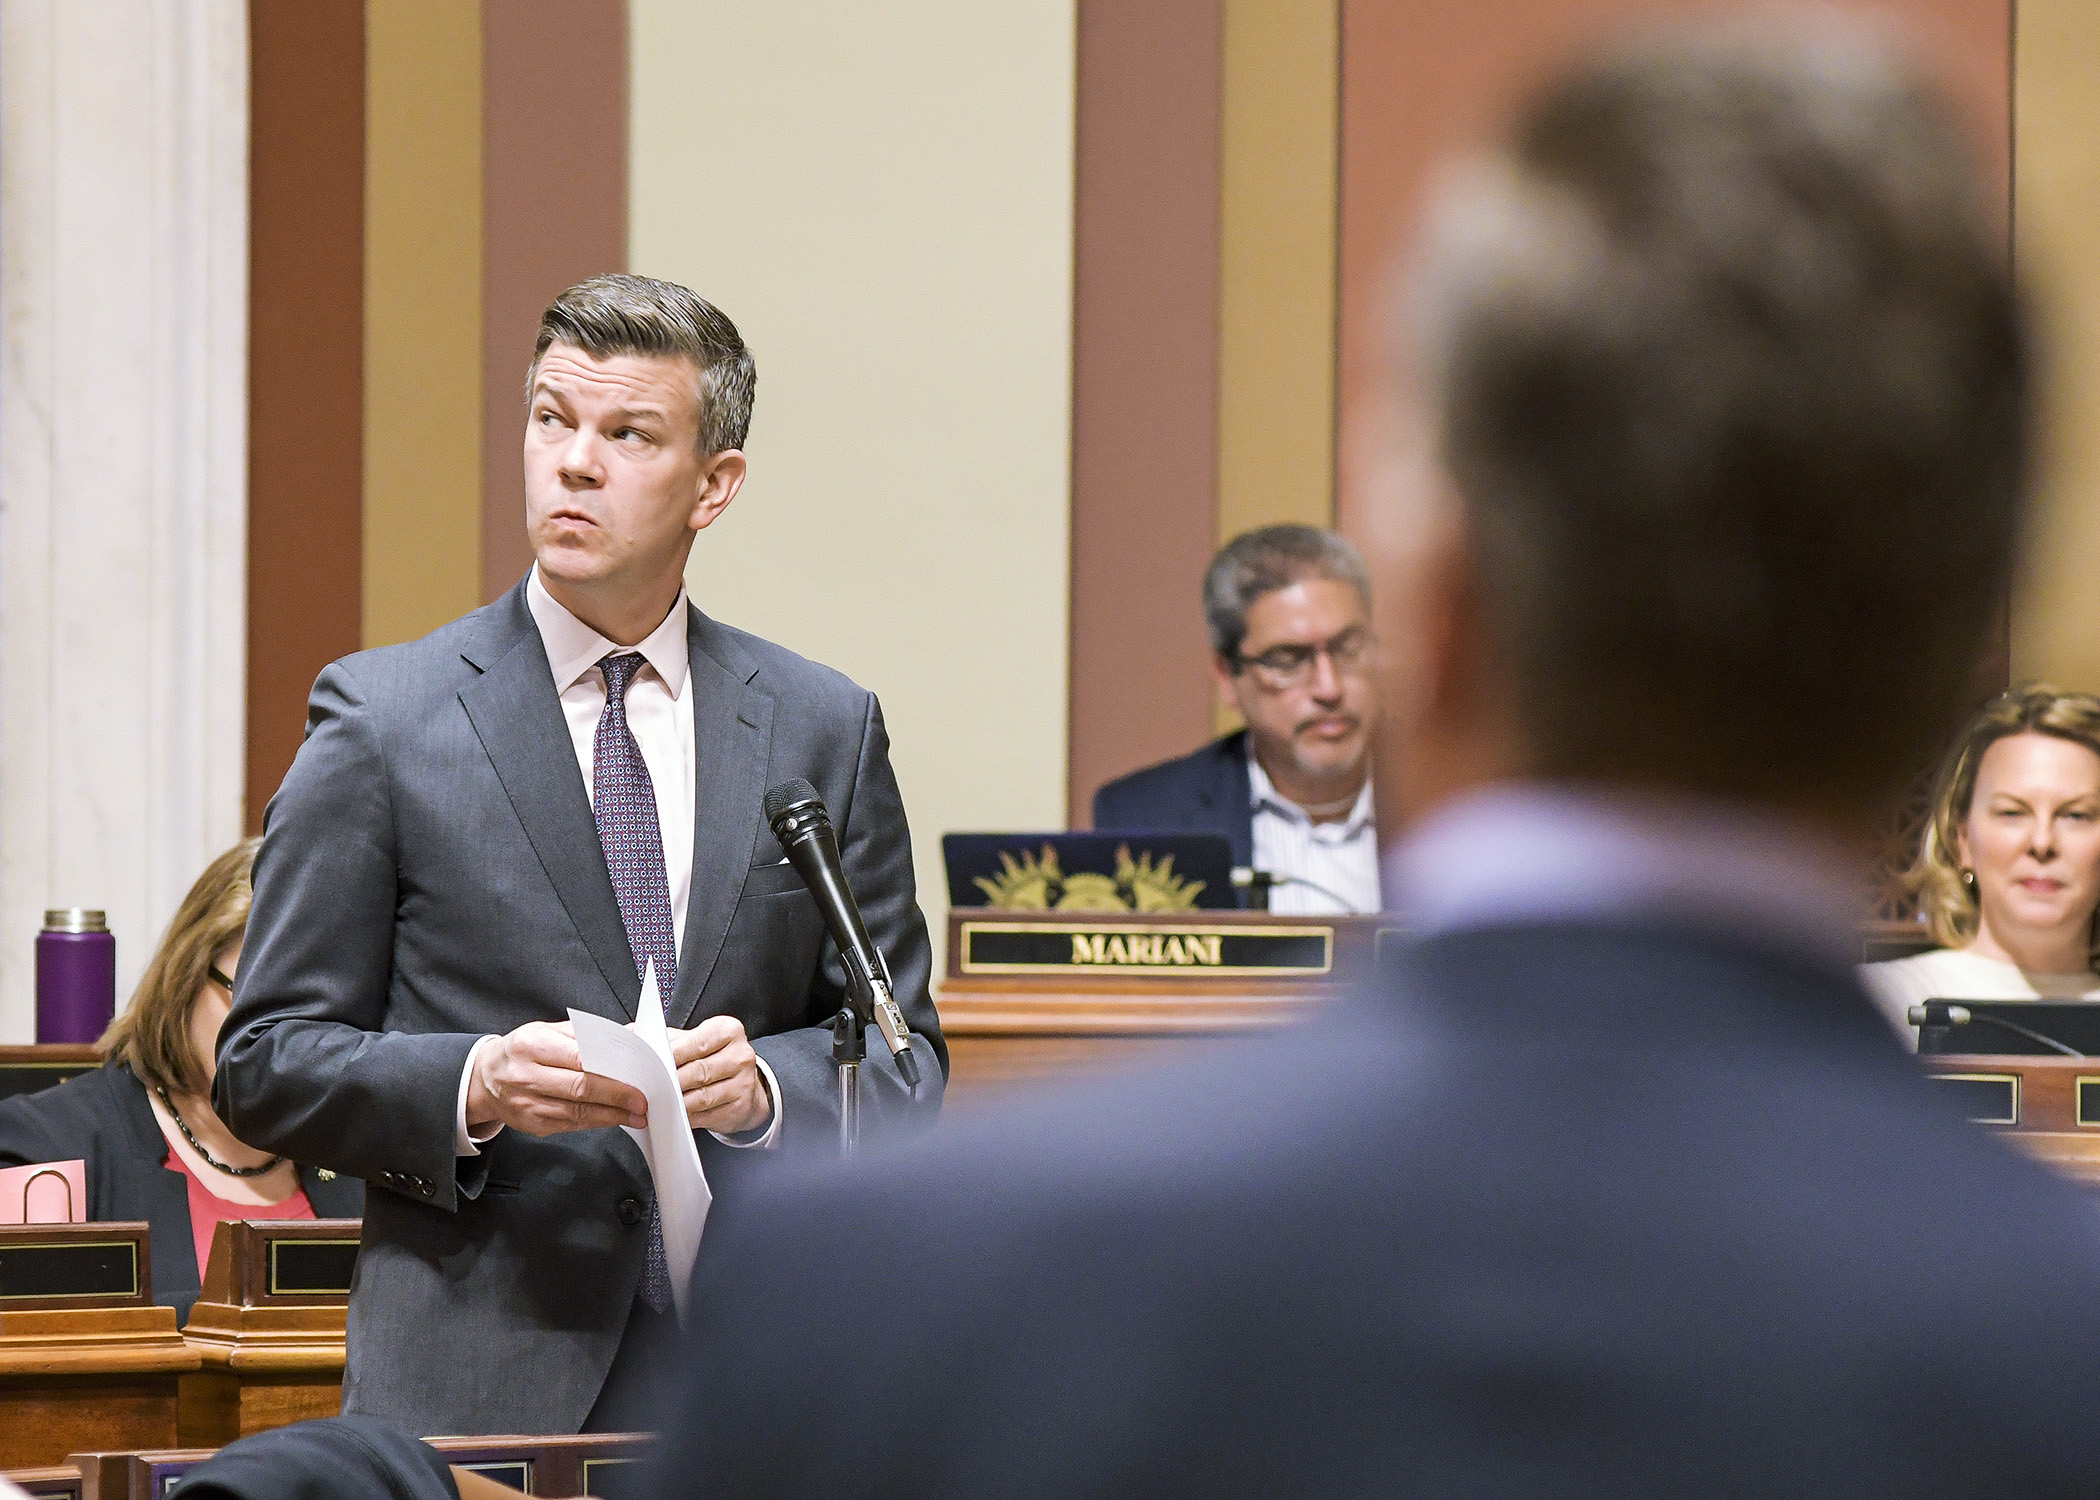 House Majority Leader Ryan Winkler eyes the clock in the House Chamber while Minority Leader Kurt Daudt speaks before a Friday morning recess. Just three days remain before the regular legislative session must conclude. Photo by Andrew VonBank